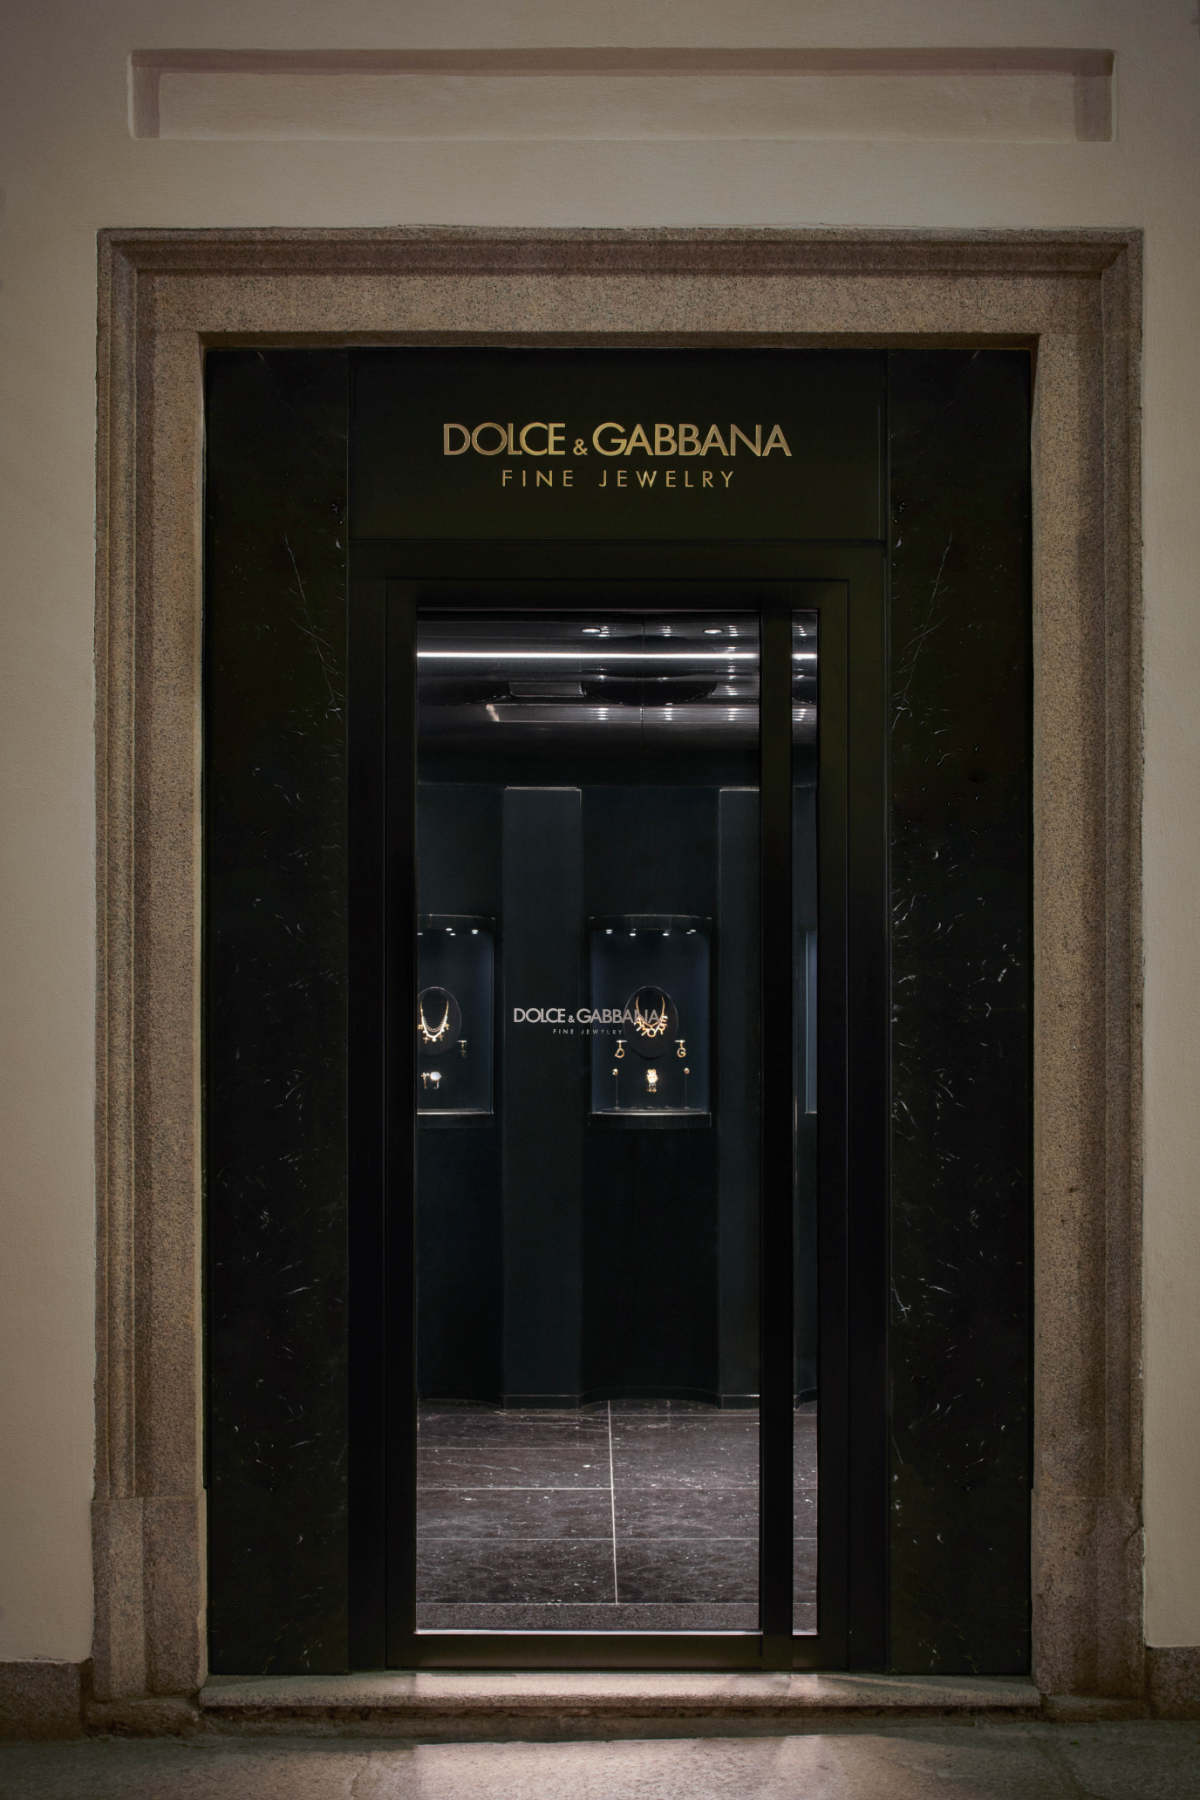 Dolce&Gabbana Opened Their World’s First Boutique Exclusively Dedicated To Fine Jewelry And Watches